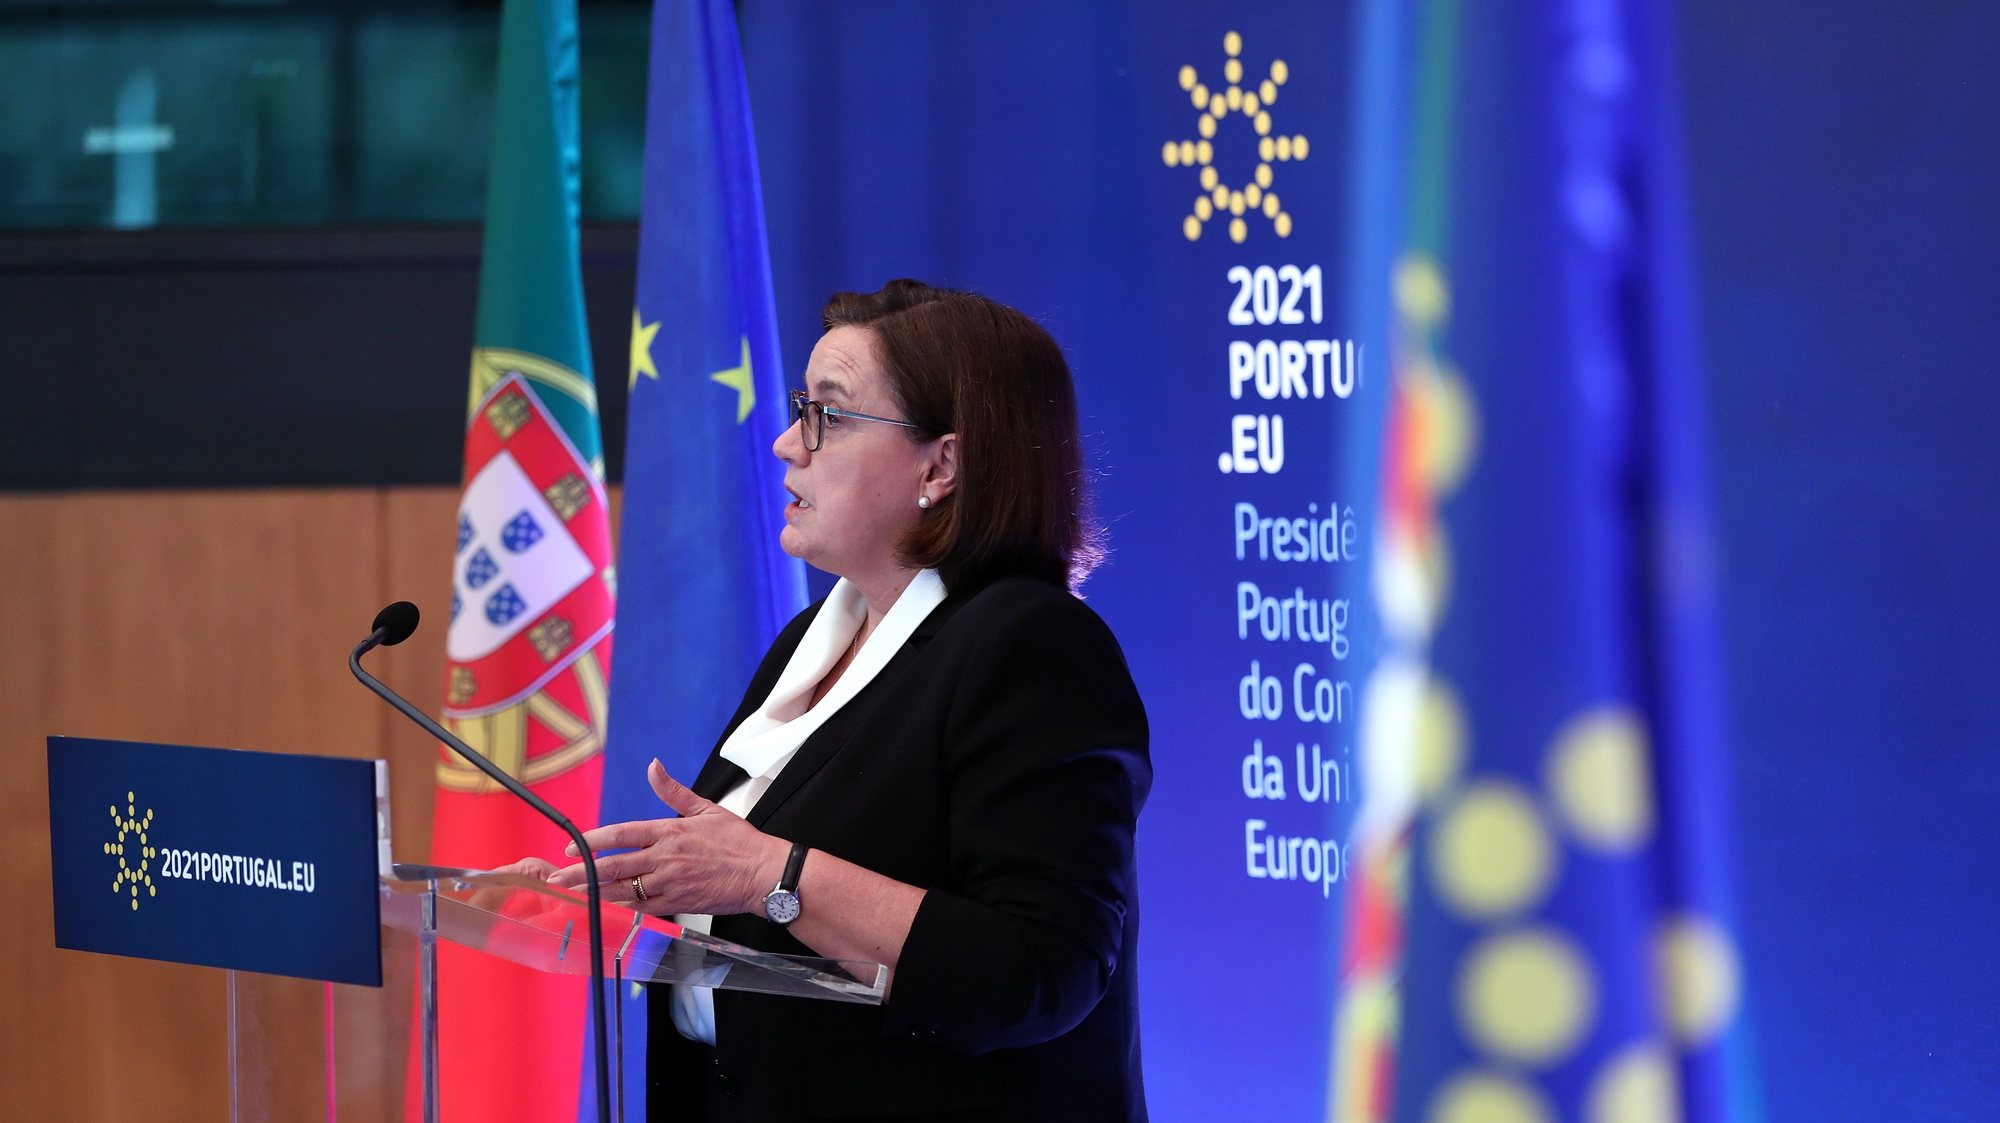 Portuguese Secretary of State for European Affairs, Ana Paula Zacarias, attends to a press conference after an Informal video conference of the Ministers of European Affairs, in Lisbon, Portugal, 23 February 2021. Ministers will exchange views on the European Democracy Action Plan and they will also assess the state of play in EU-UK relations. ANTONIO PEDRO SANTOS/LUSA